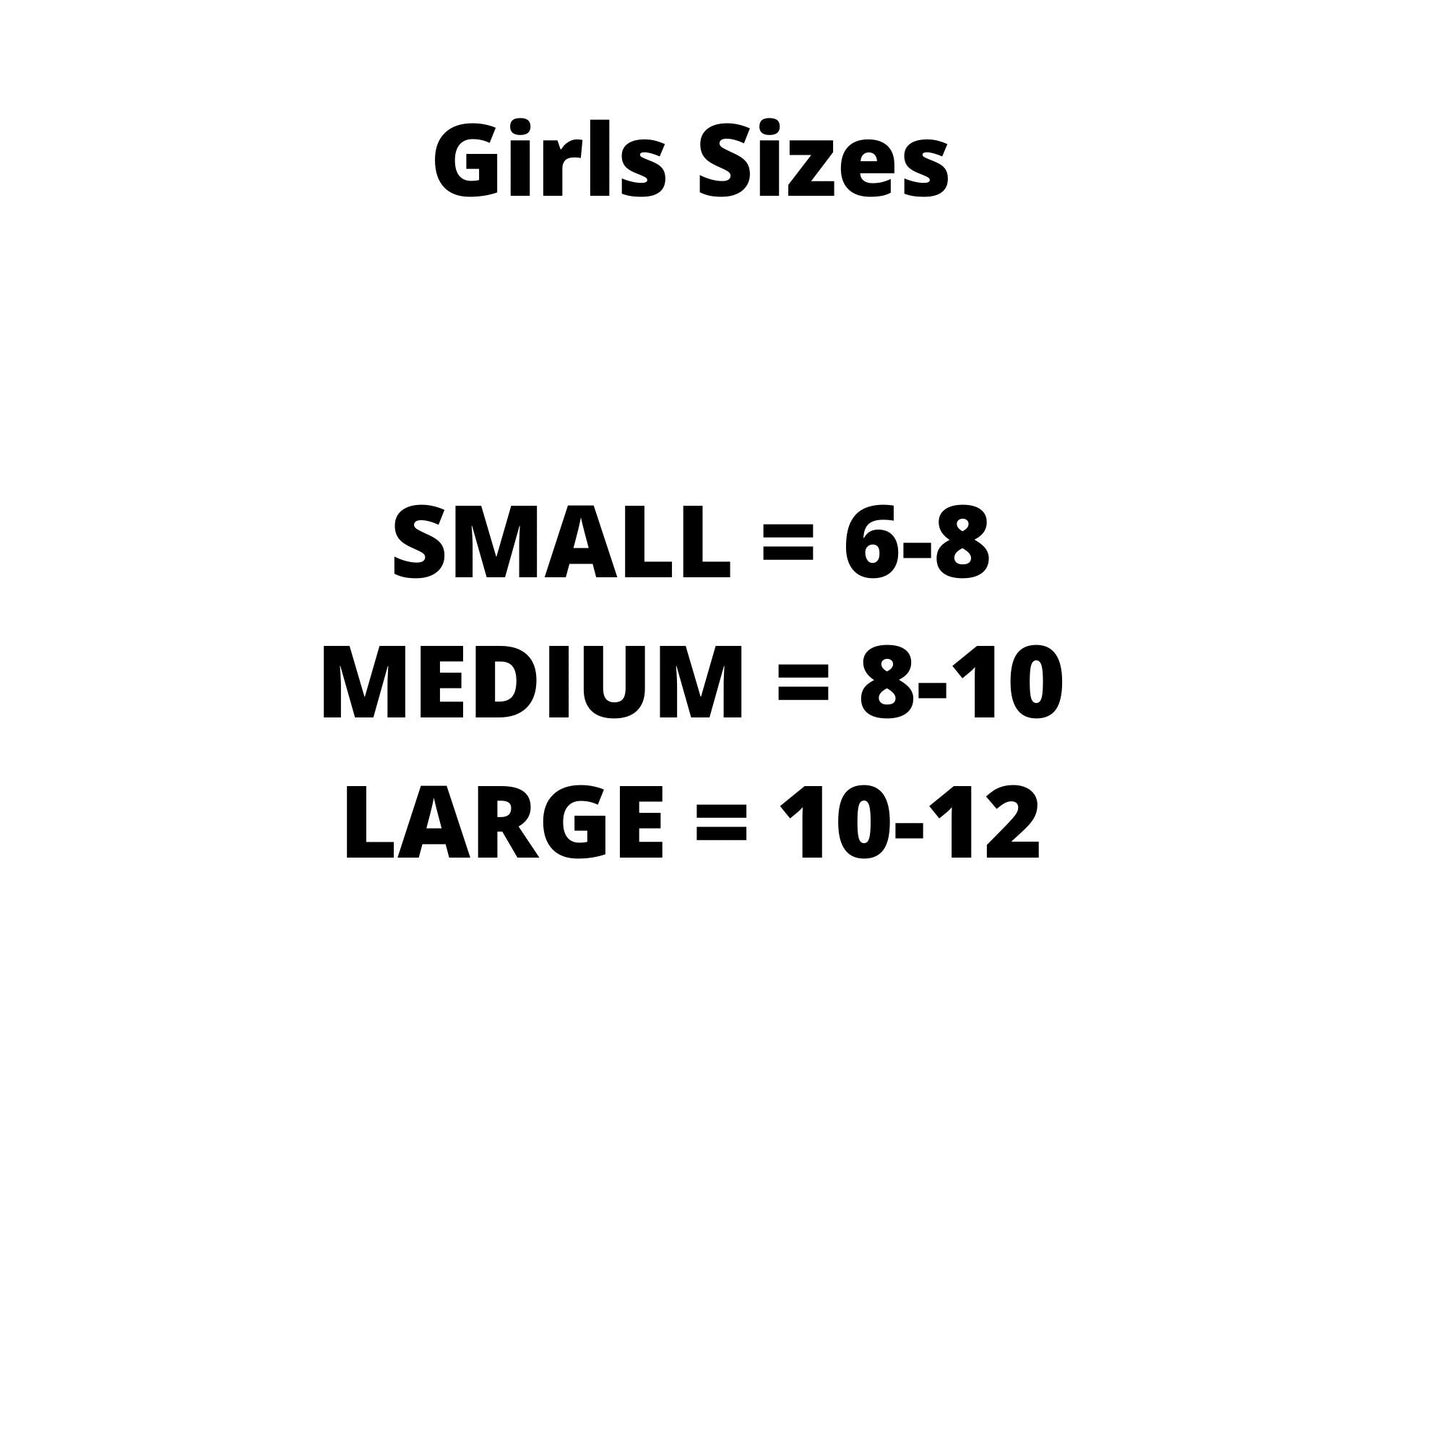 Girls Swim Dress Girls Swimwear Kids Swimsuit Full Cover Sun Protection Play Clothes Camp Clothes Tzniut Dress for Play Exercise